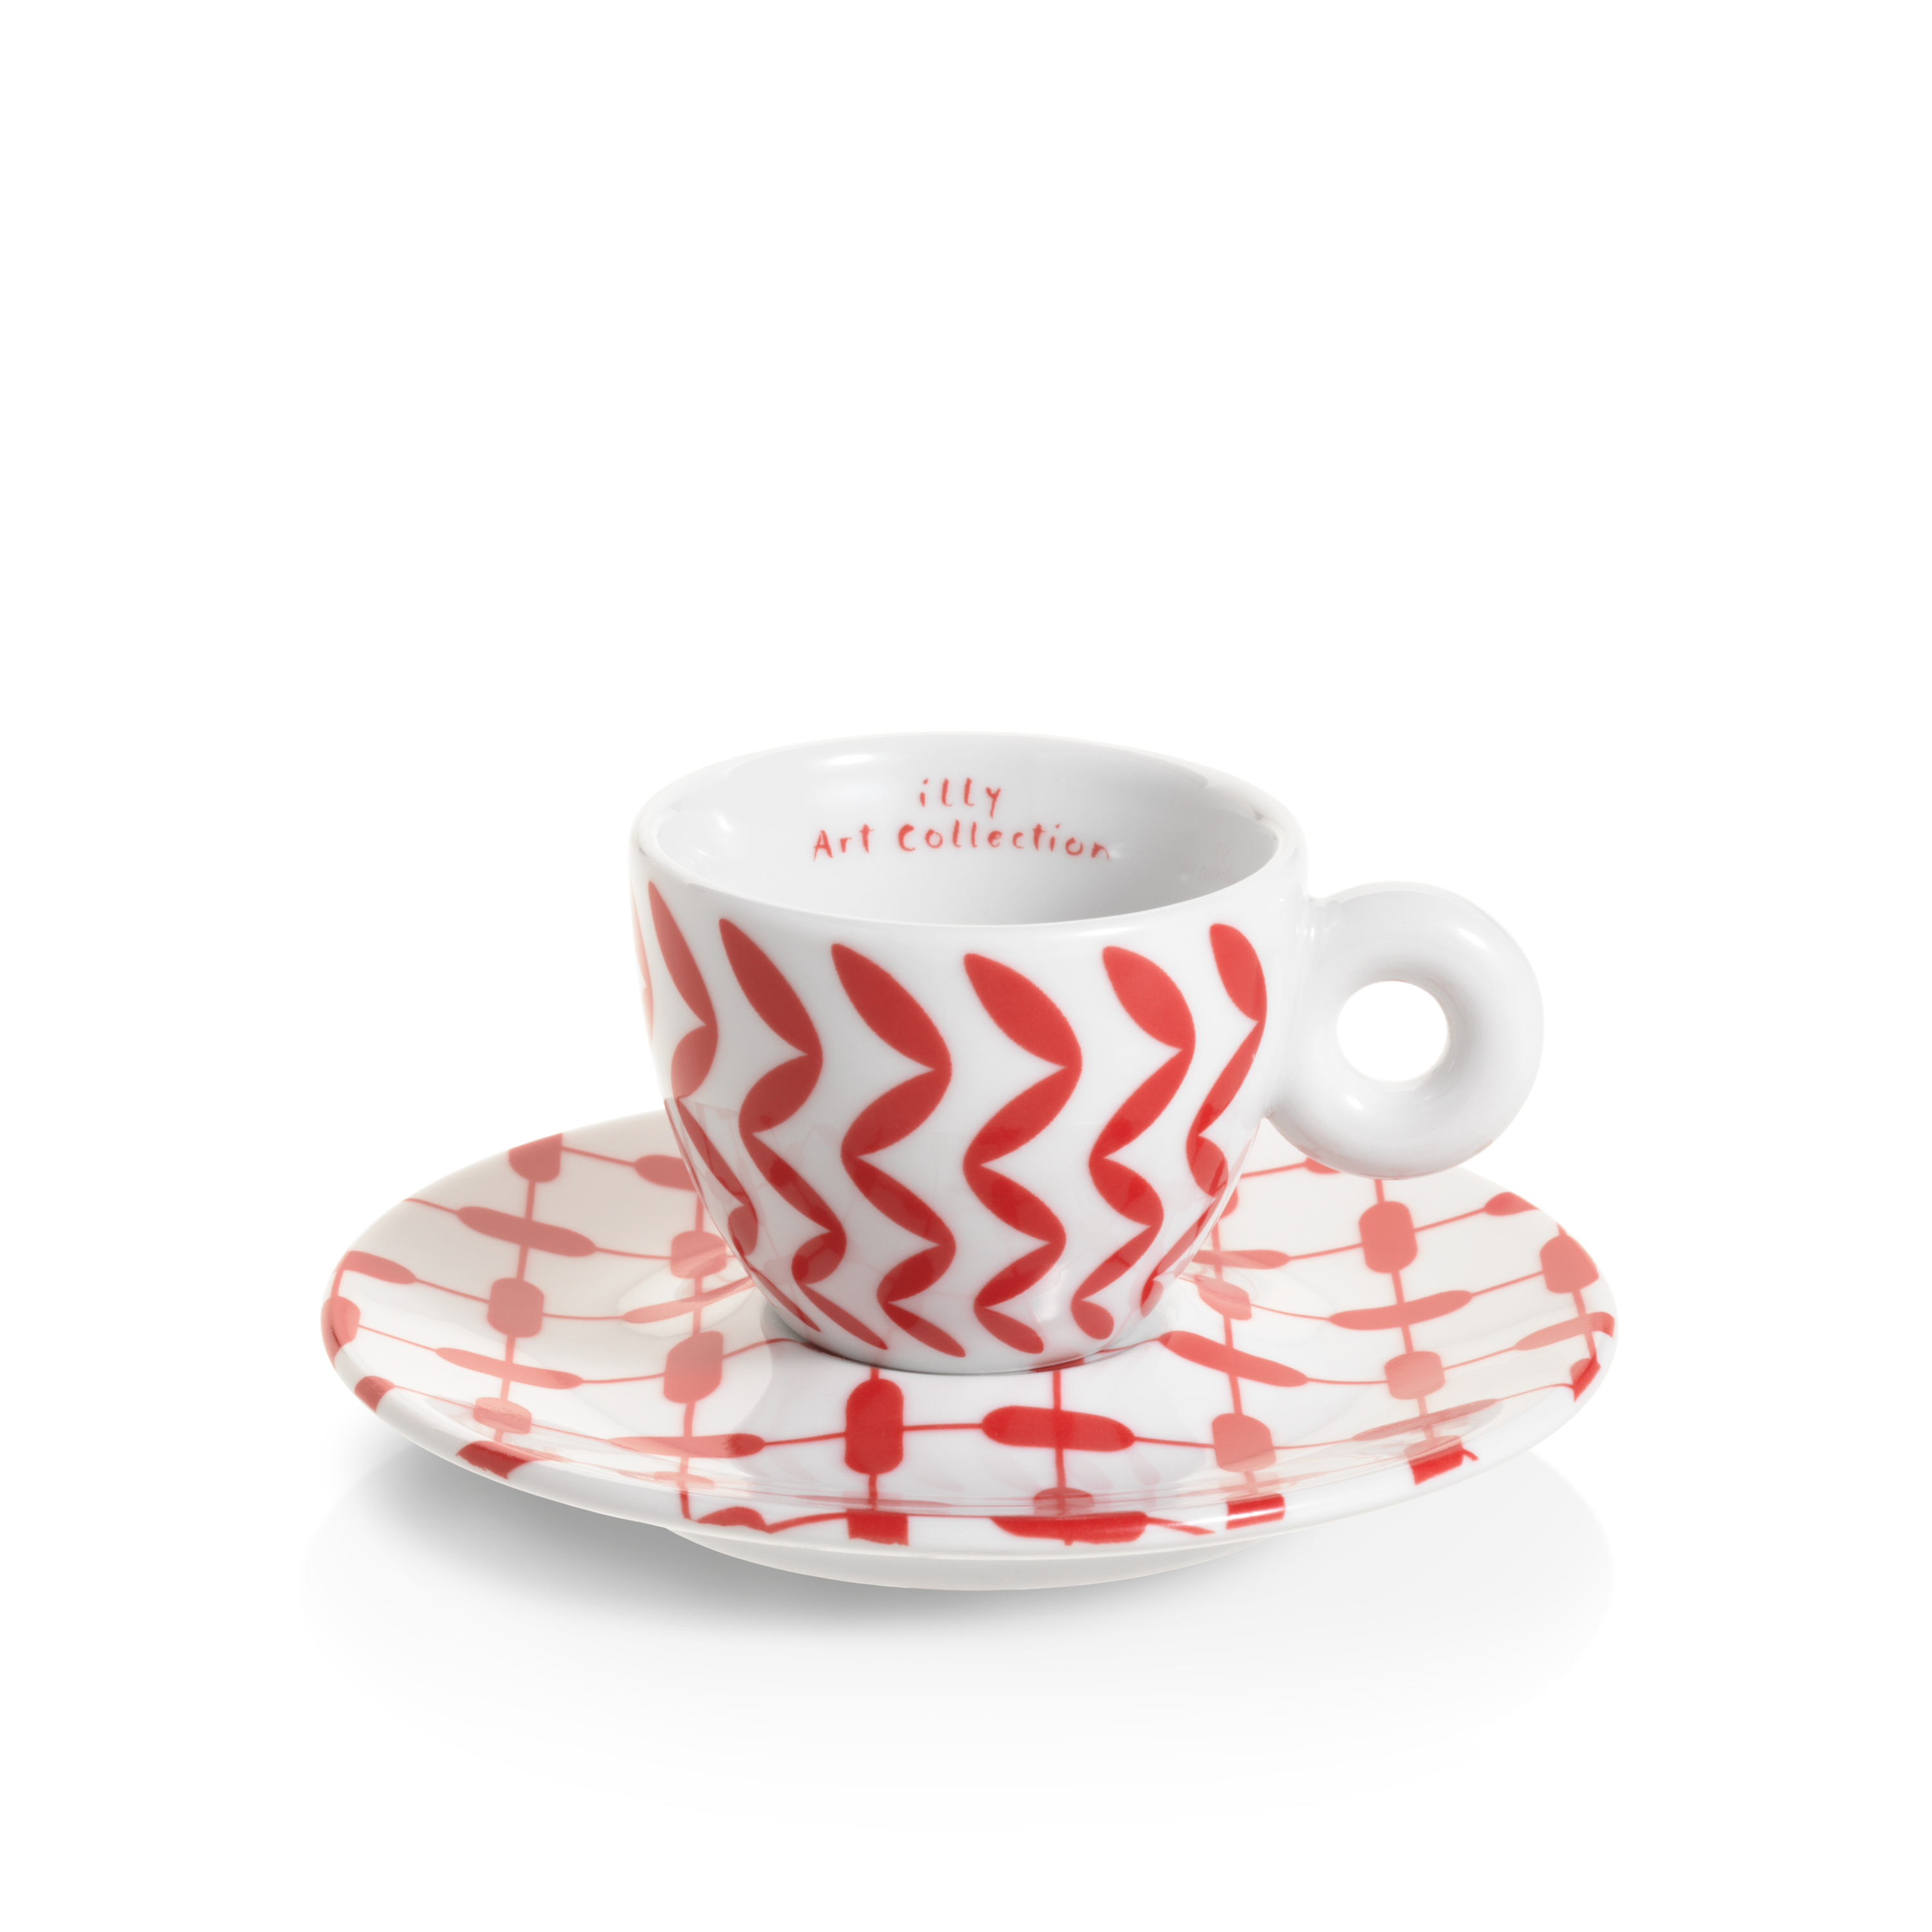 illy Art Collection MONA HATOUM Gift Set 2 Espresso Cups, Cups, 02-02-6075